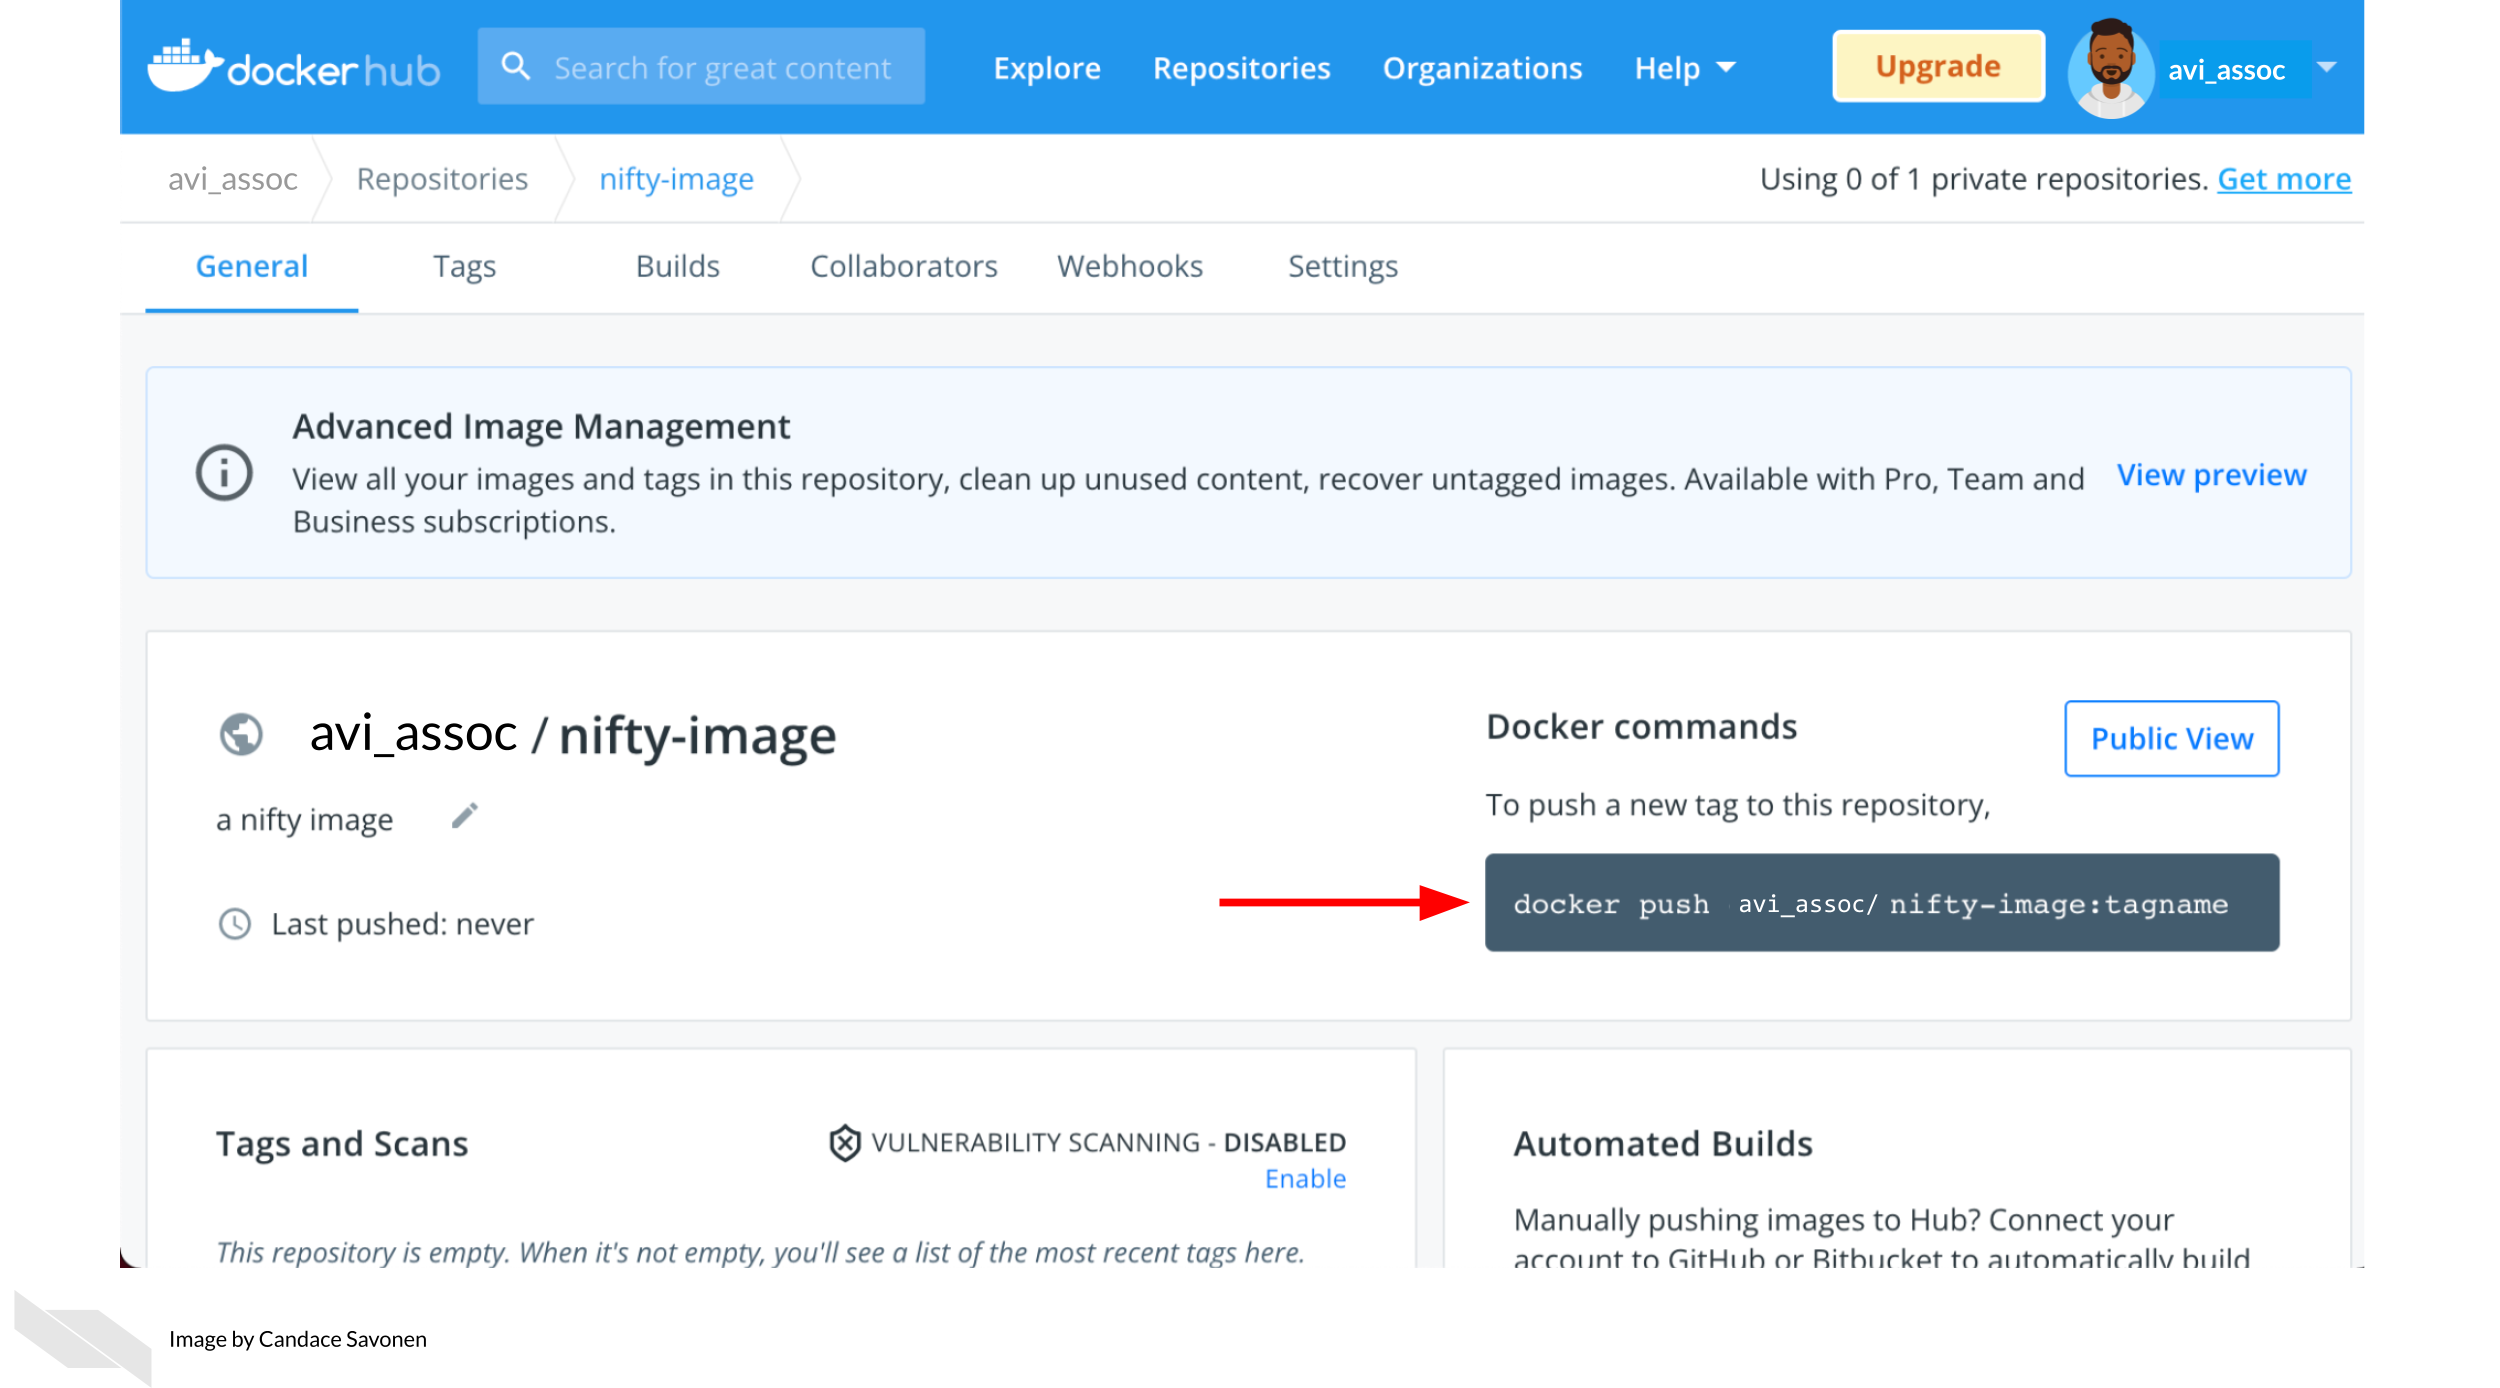 After you've created the image repository, you will be brought to the image repository page. It will tell you Last pushed: never. On the right it will tell you the command you will need in order to push the image to dockerhub.